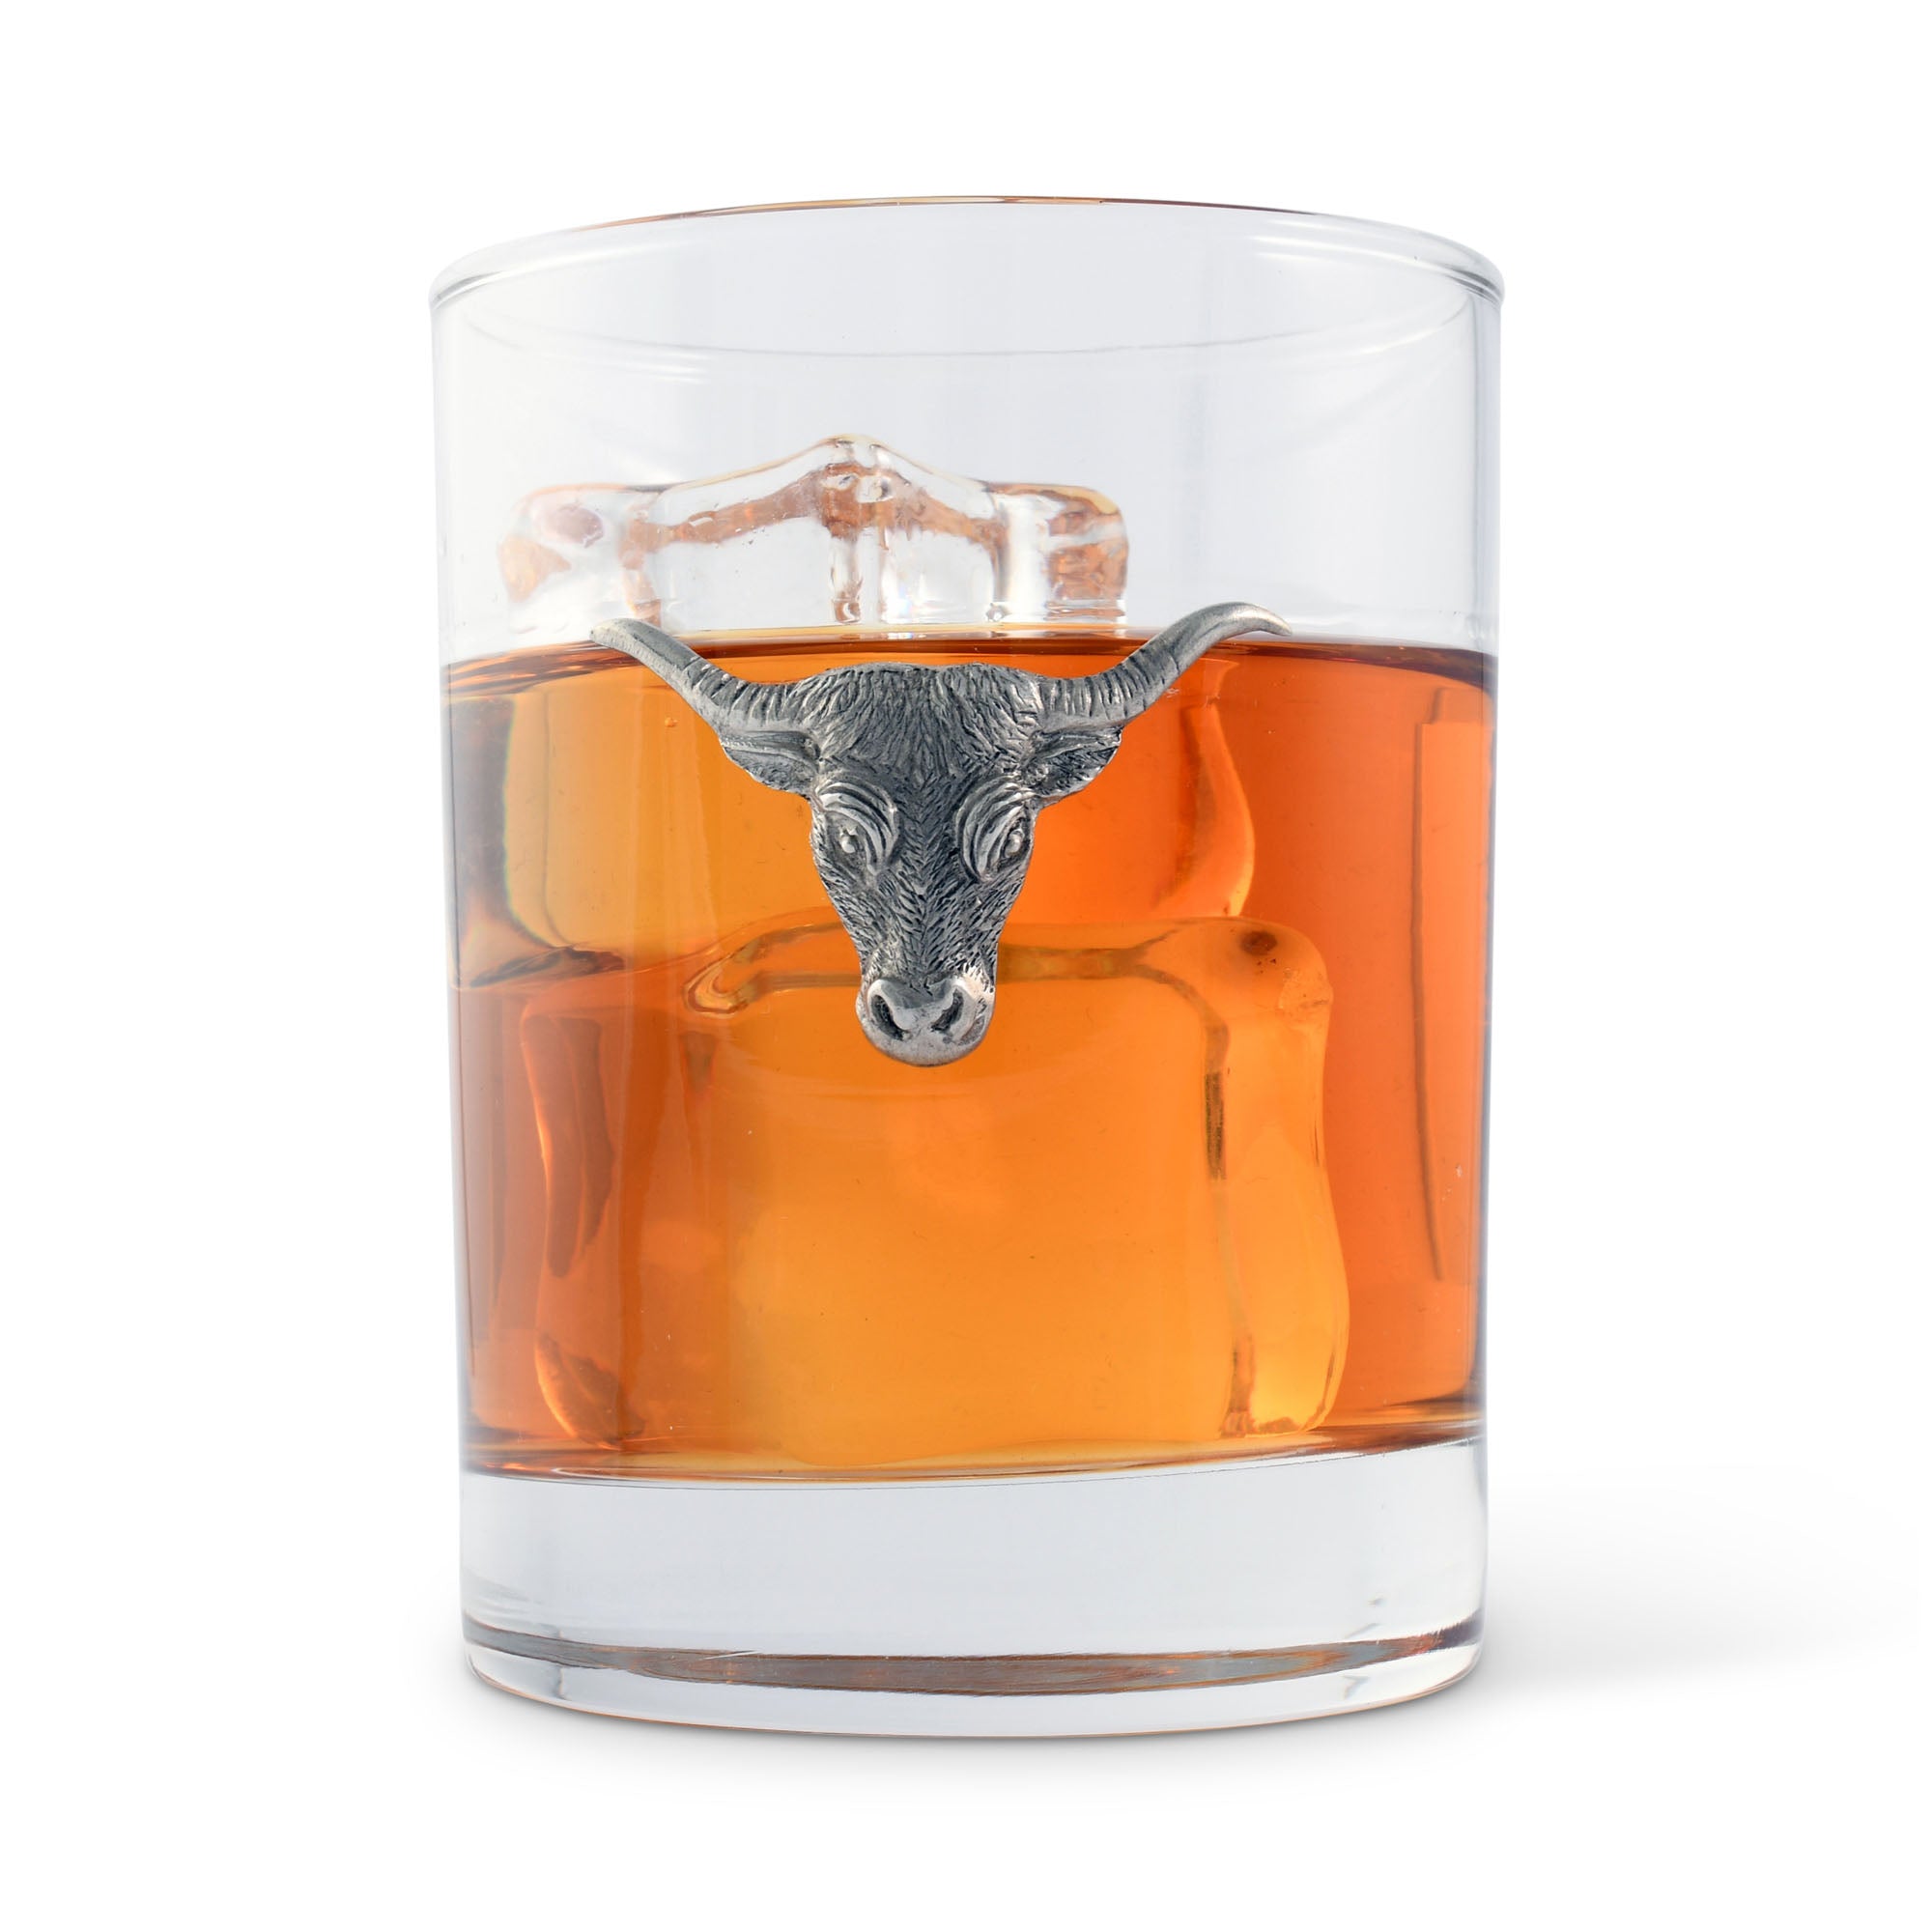 Vagabond House Long Horn Double Old Fashion Bar Glass Product Image